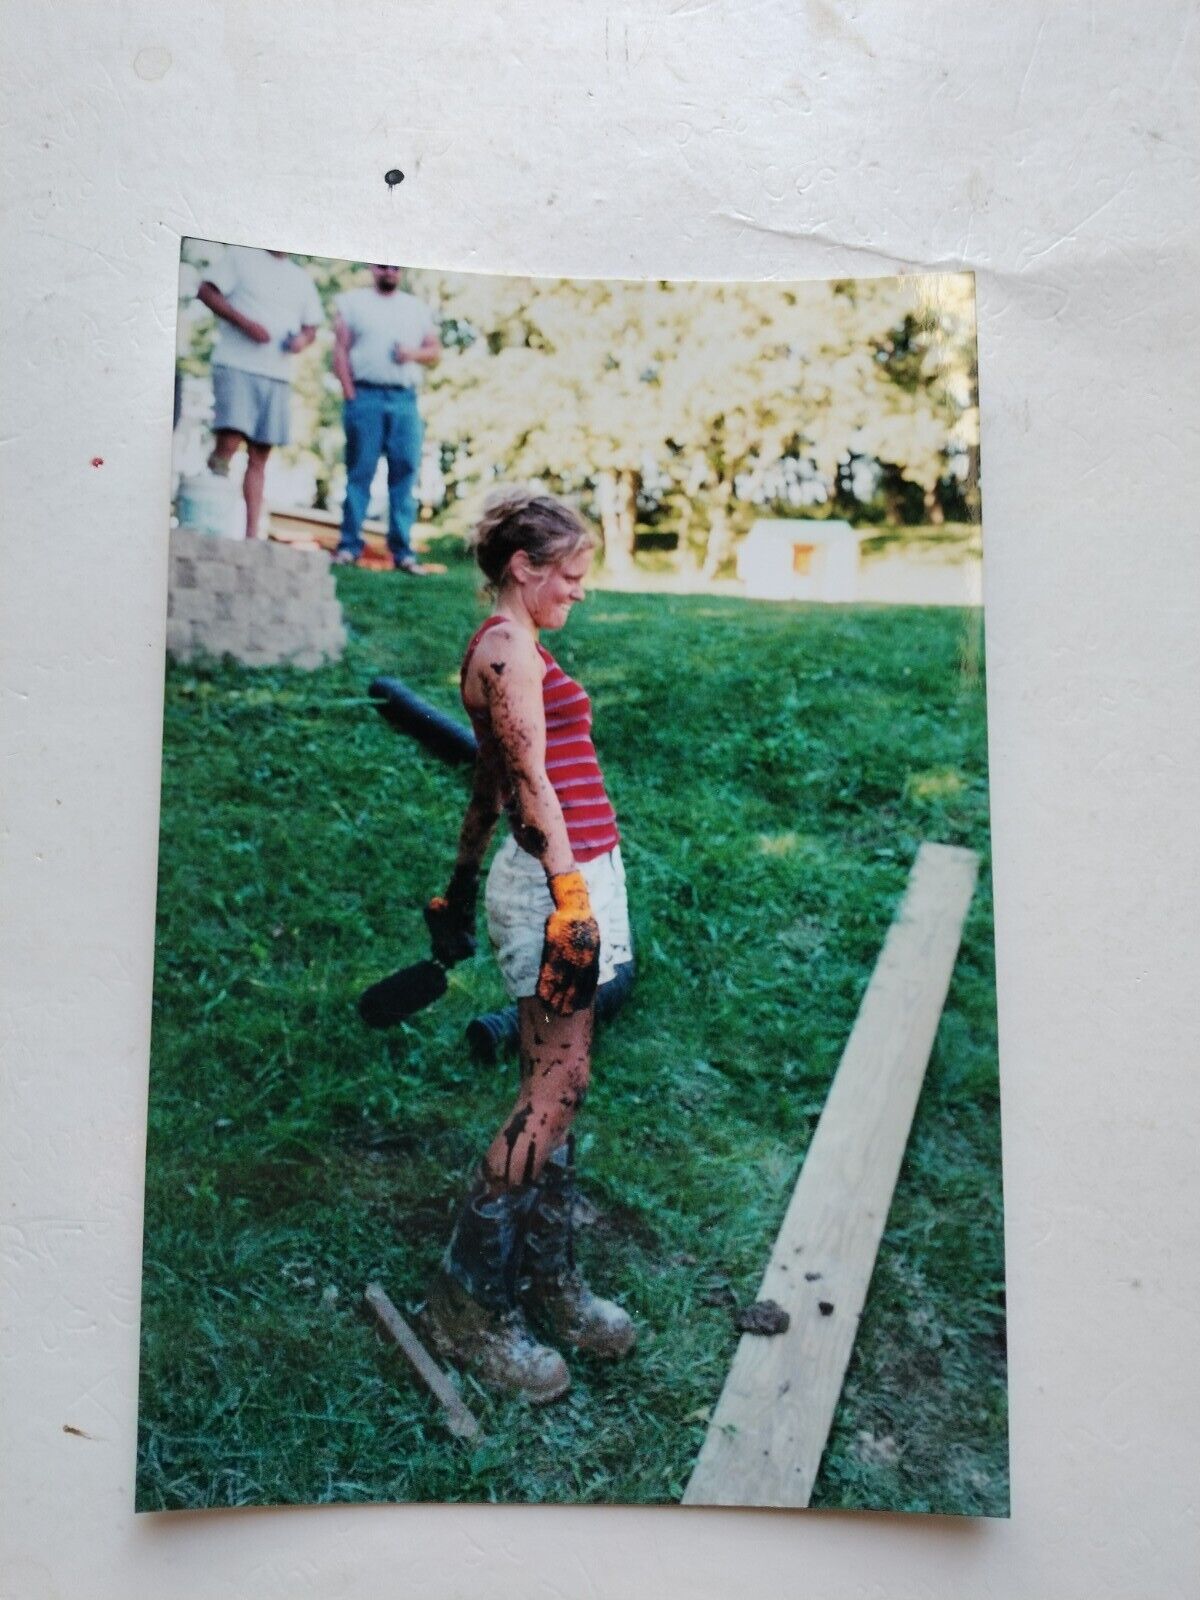 Vtg Found Color Original Photo Camping Snapshot Muddy Dirty Cute Girl In Boots